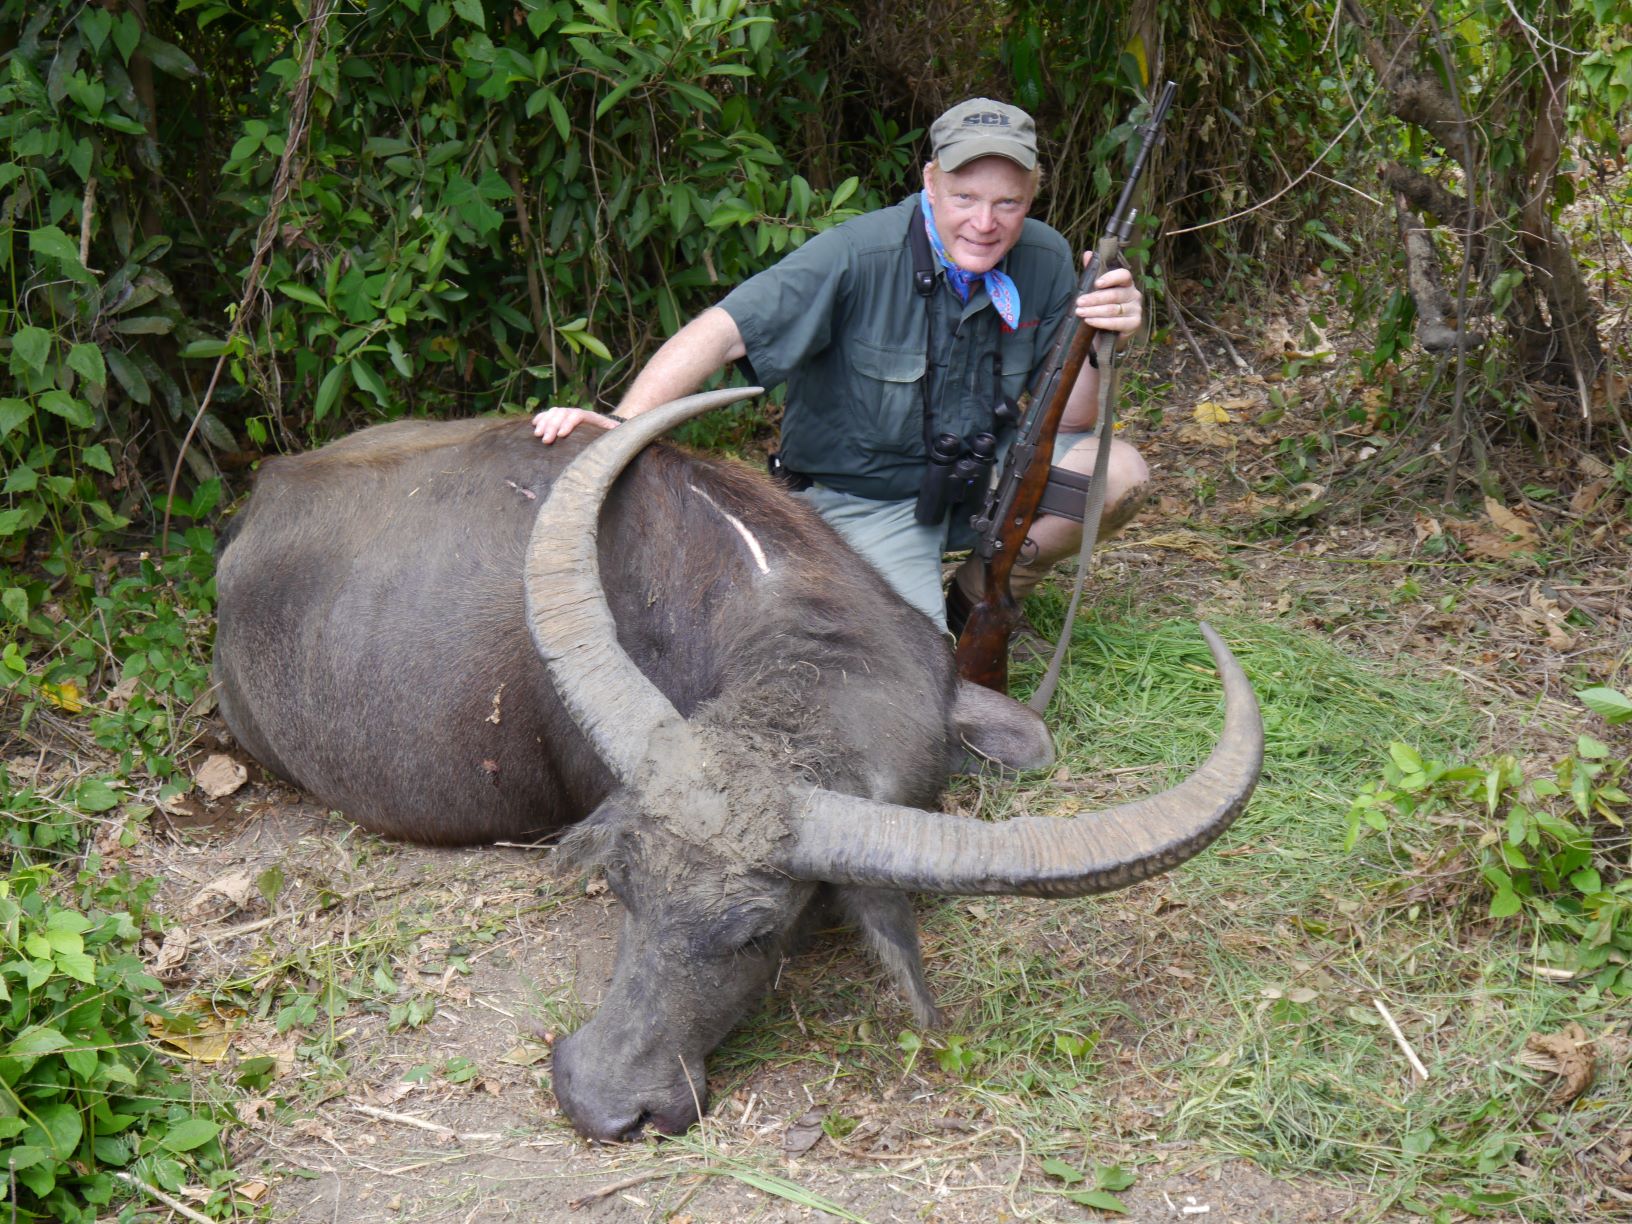 This Asian water buffalo is the largest game I’ve taken with either .30-06 or .308. Firearms can’t be brought into the Philippines, so we used an old M14 and military ball ammo borrowed from the local military. For close-range jungle shooting it worked just fine!